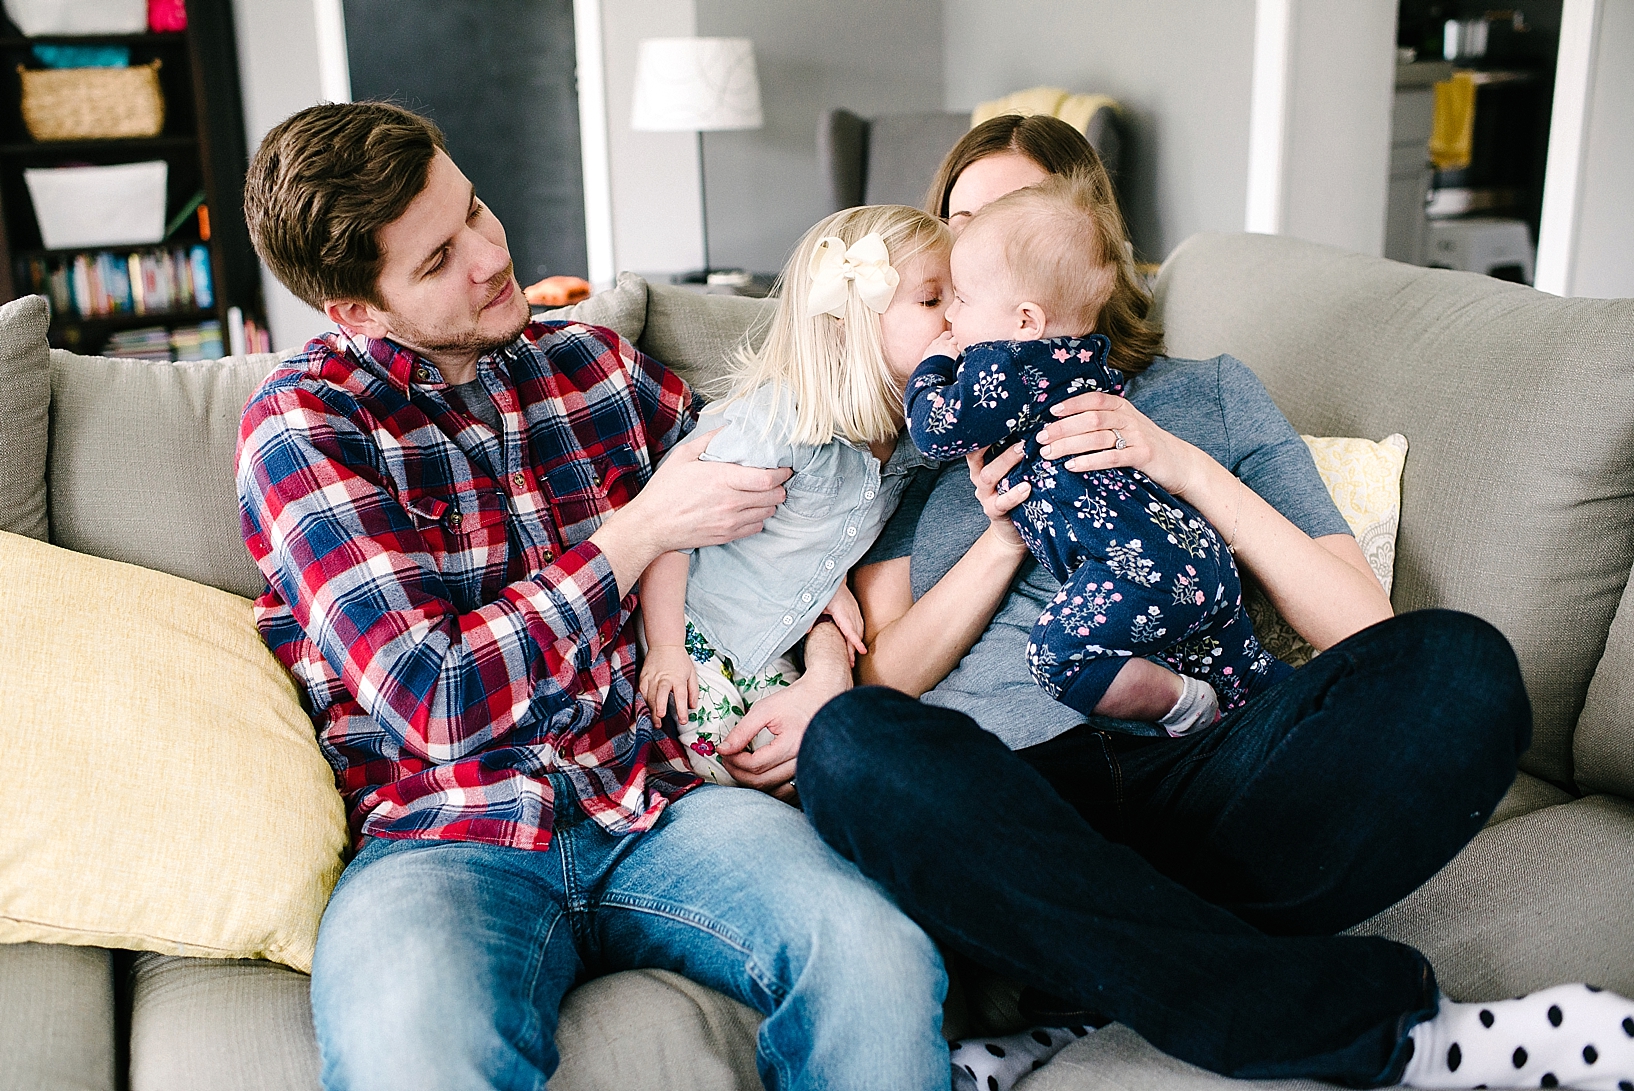 parents sitting on couch holding young daughters giving each other a kiss